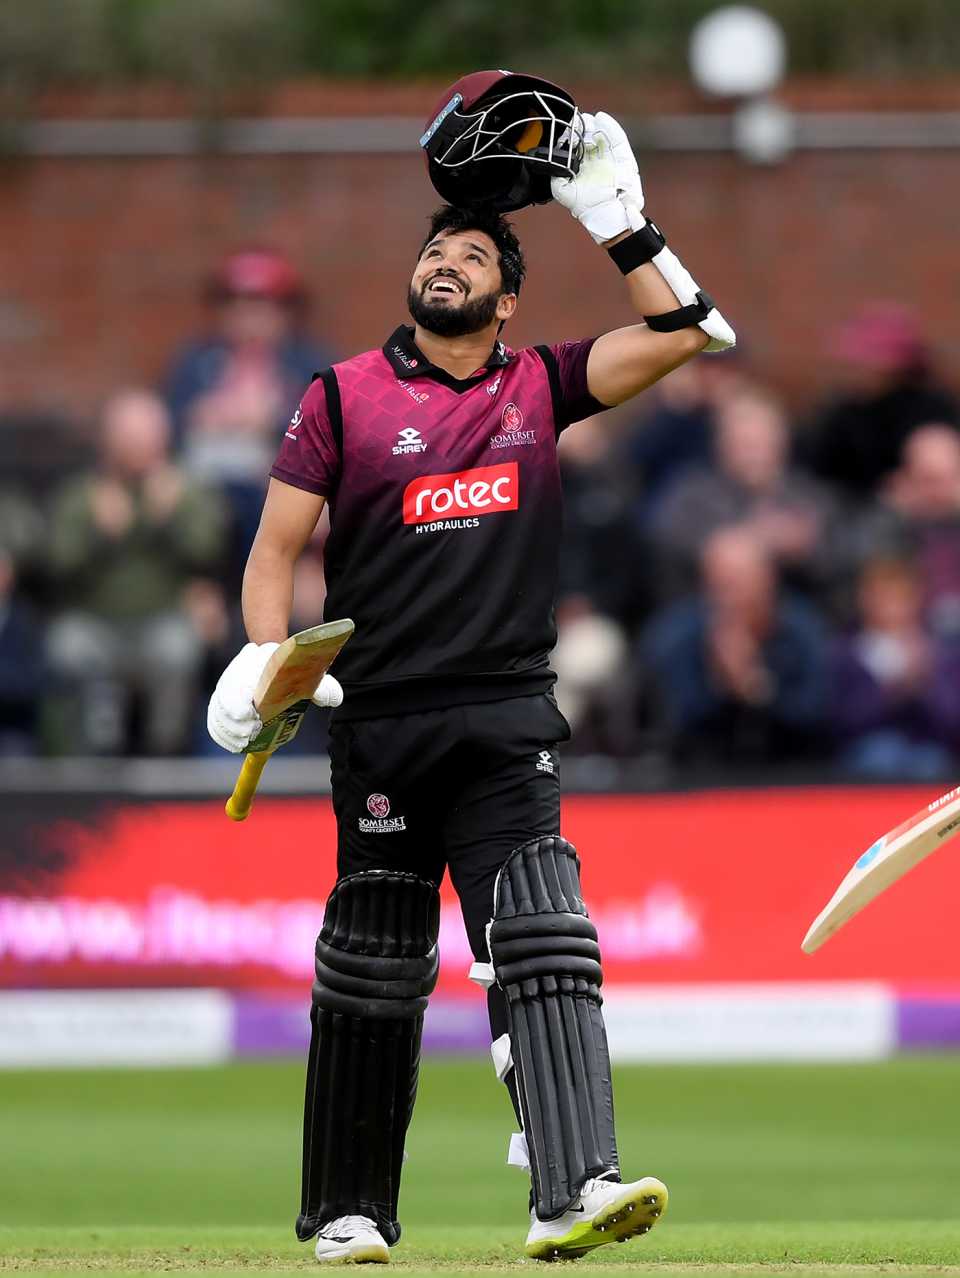 Azhar Ali made his first one-day hundred for Somerset